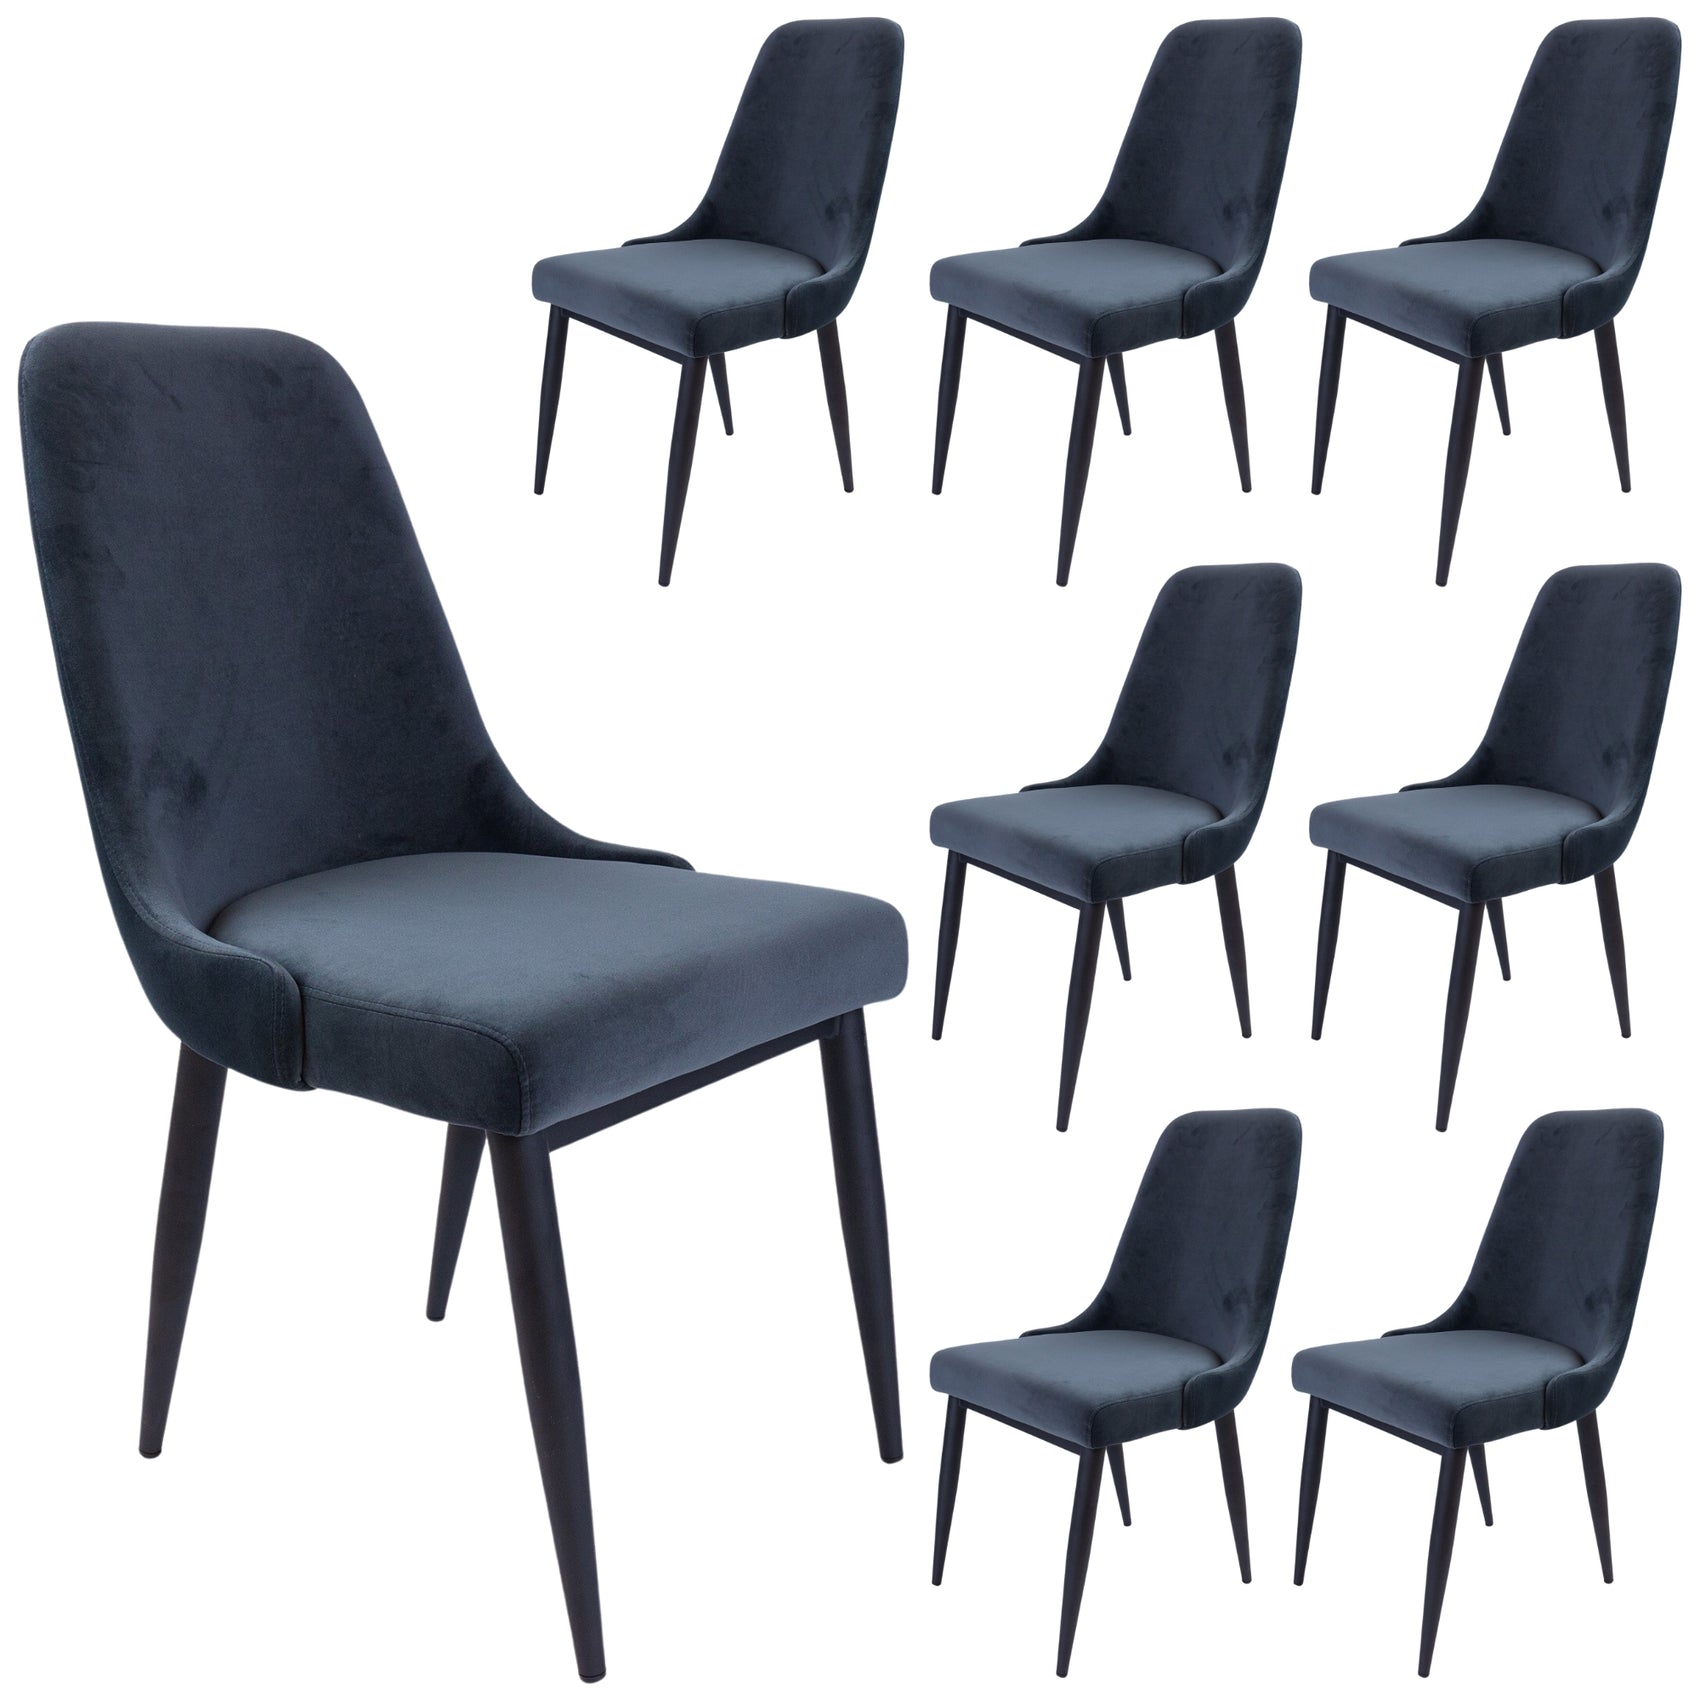 Eva Dining Chair Set of 8 Fabric Seat with Metal Frame - Charcoal